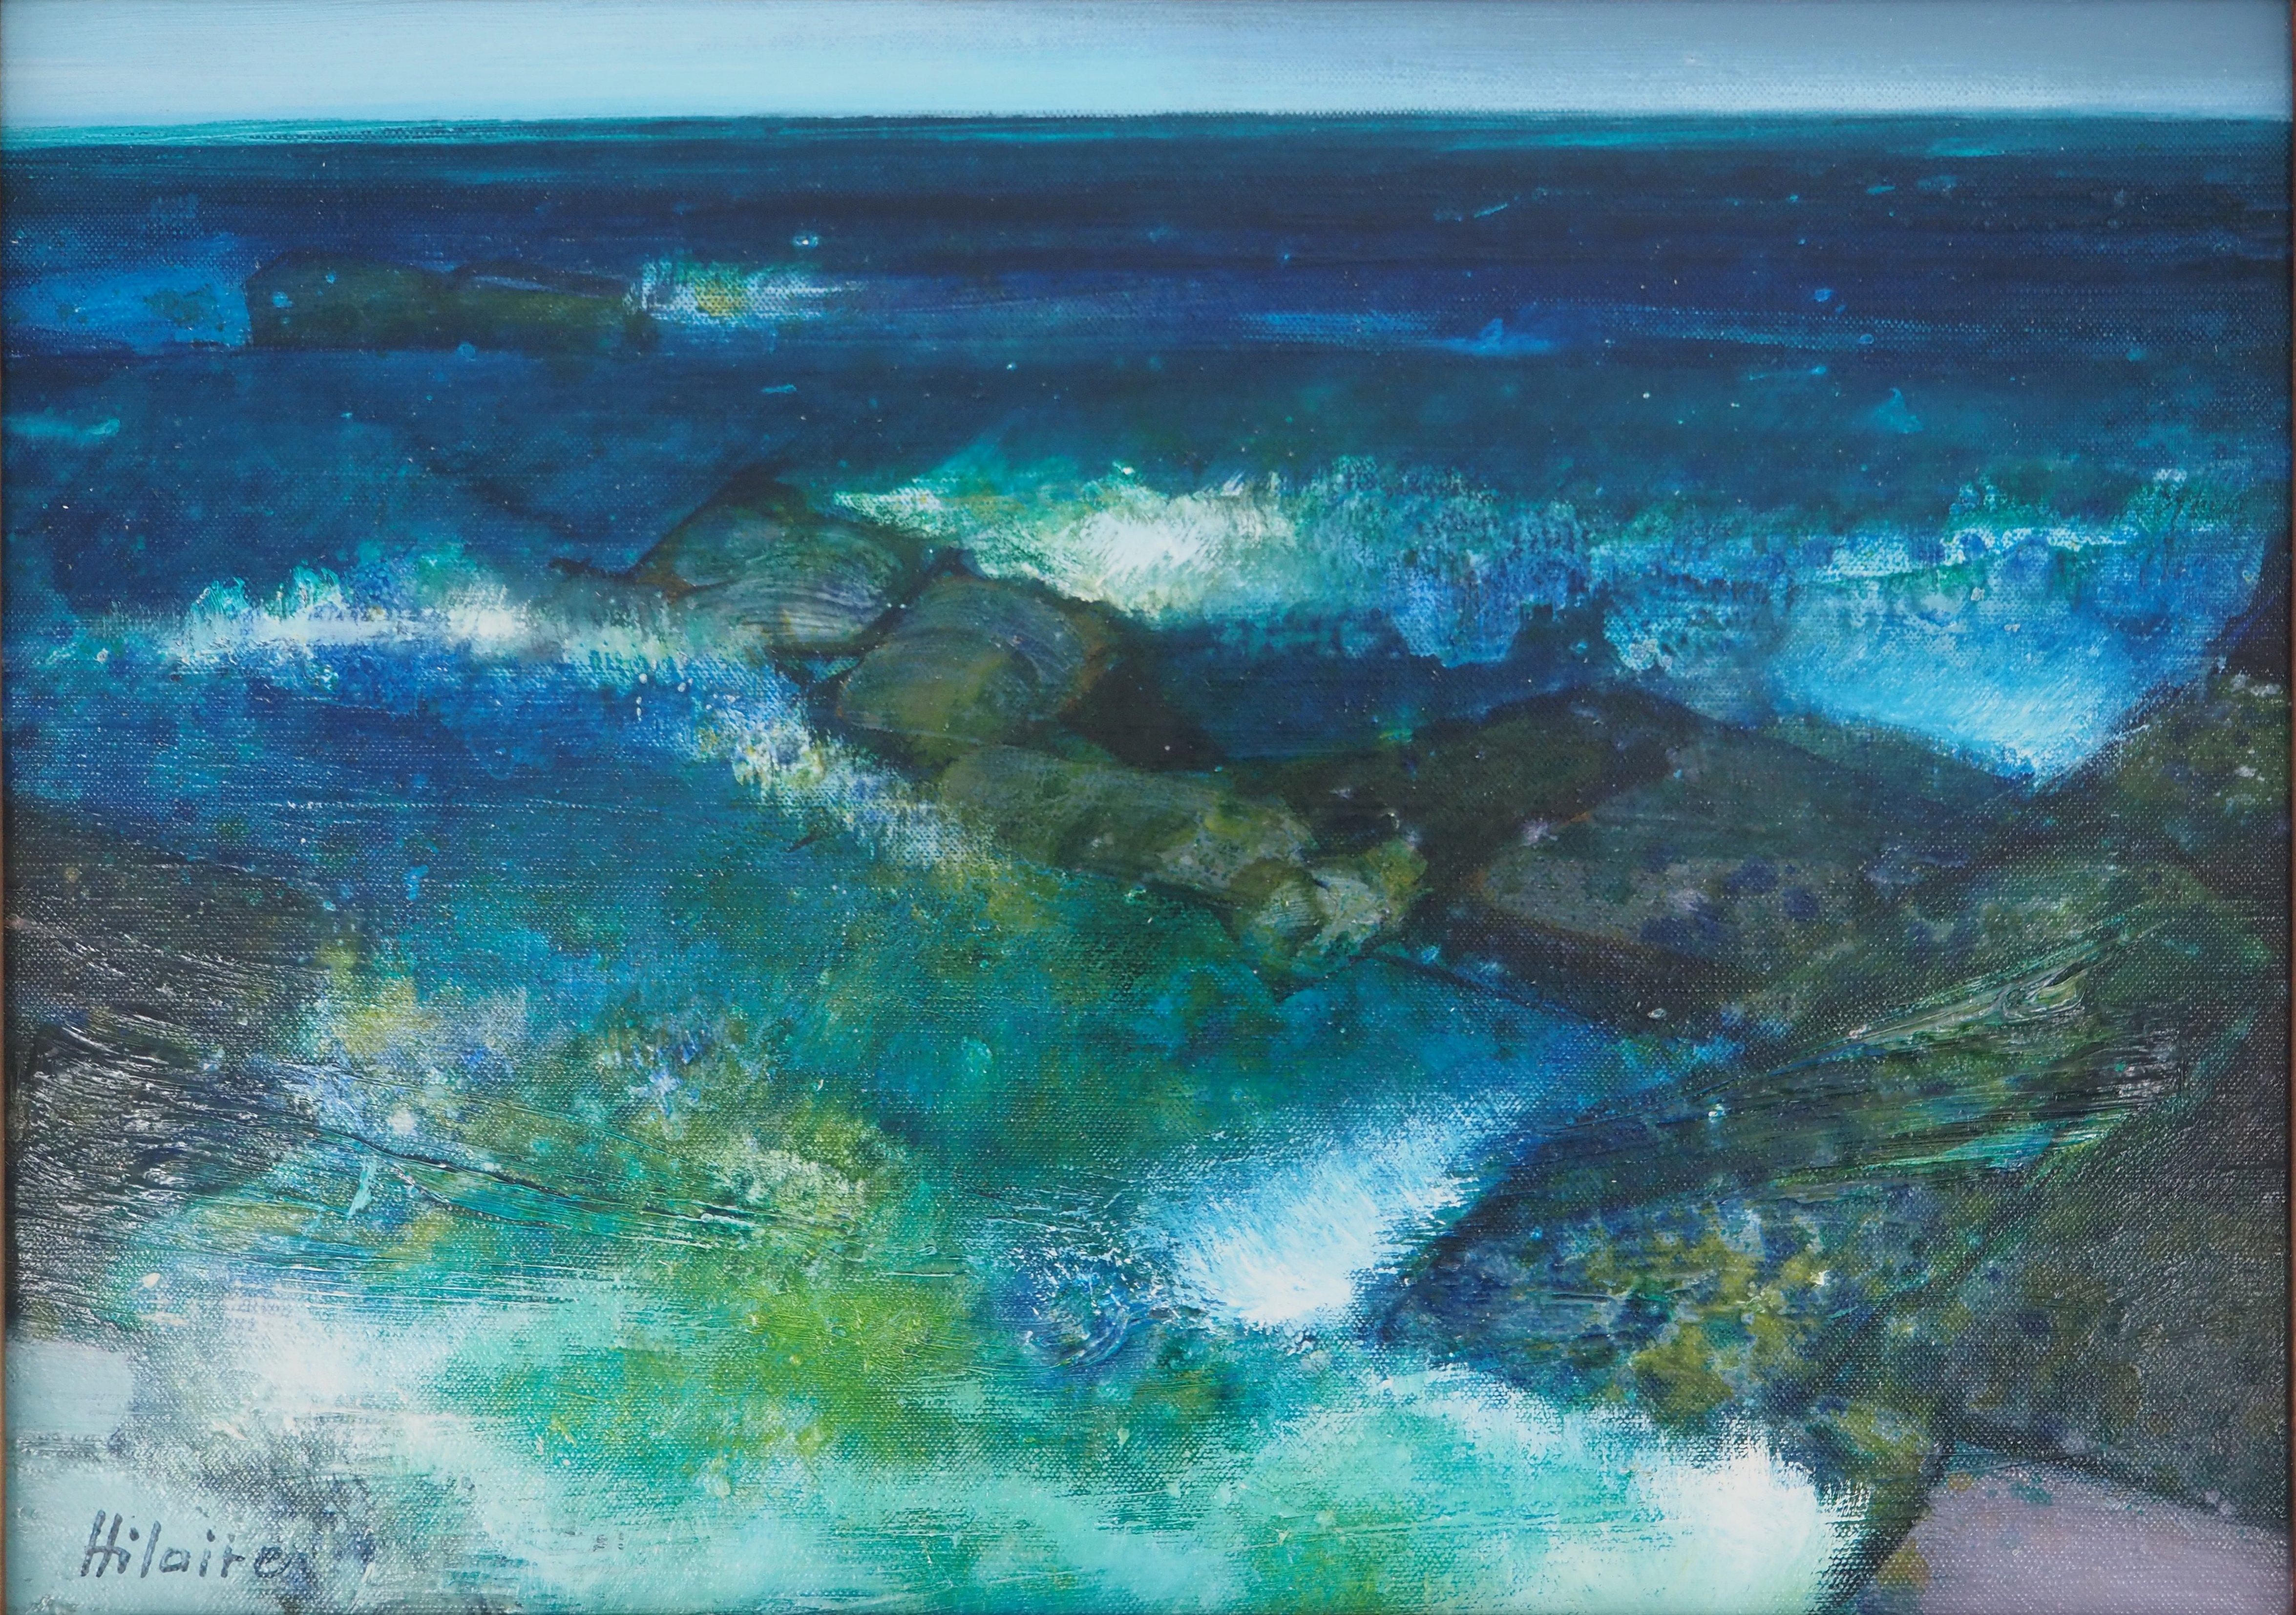 Seascape : Waves on the Coast Rocks - Original oil on canvas, Signed - Modern Painting by Camille Hilaire